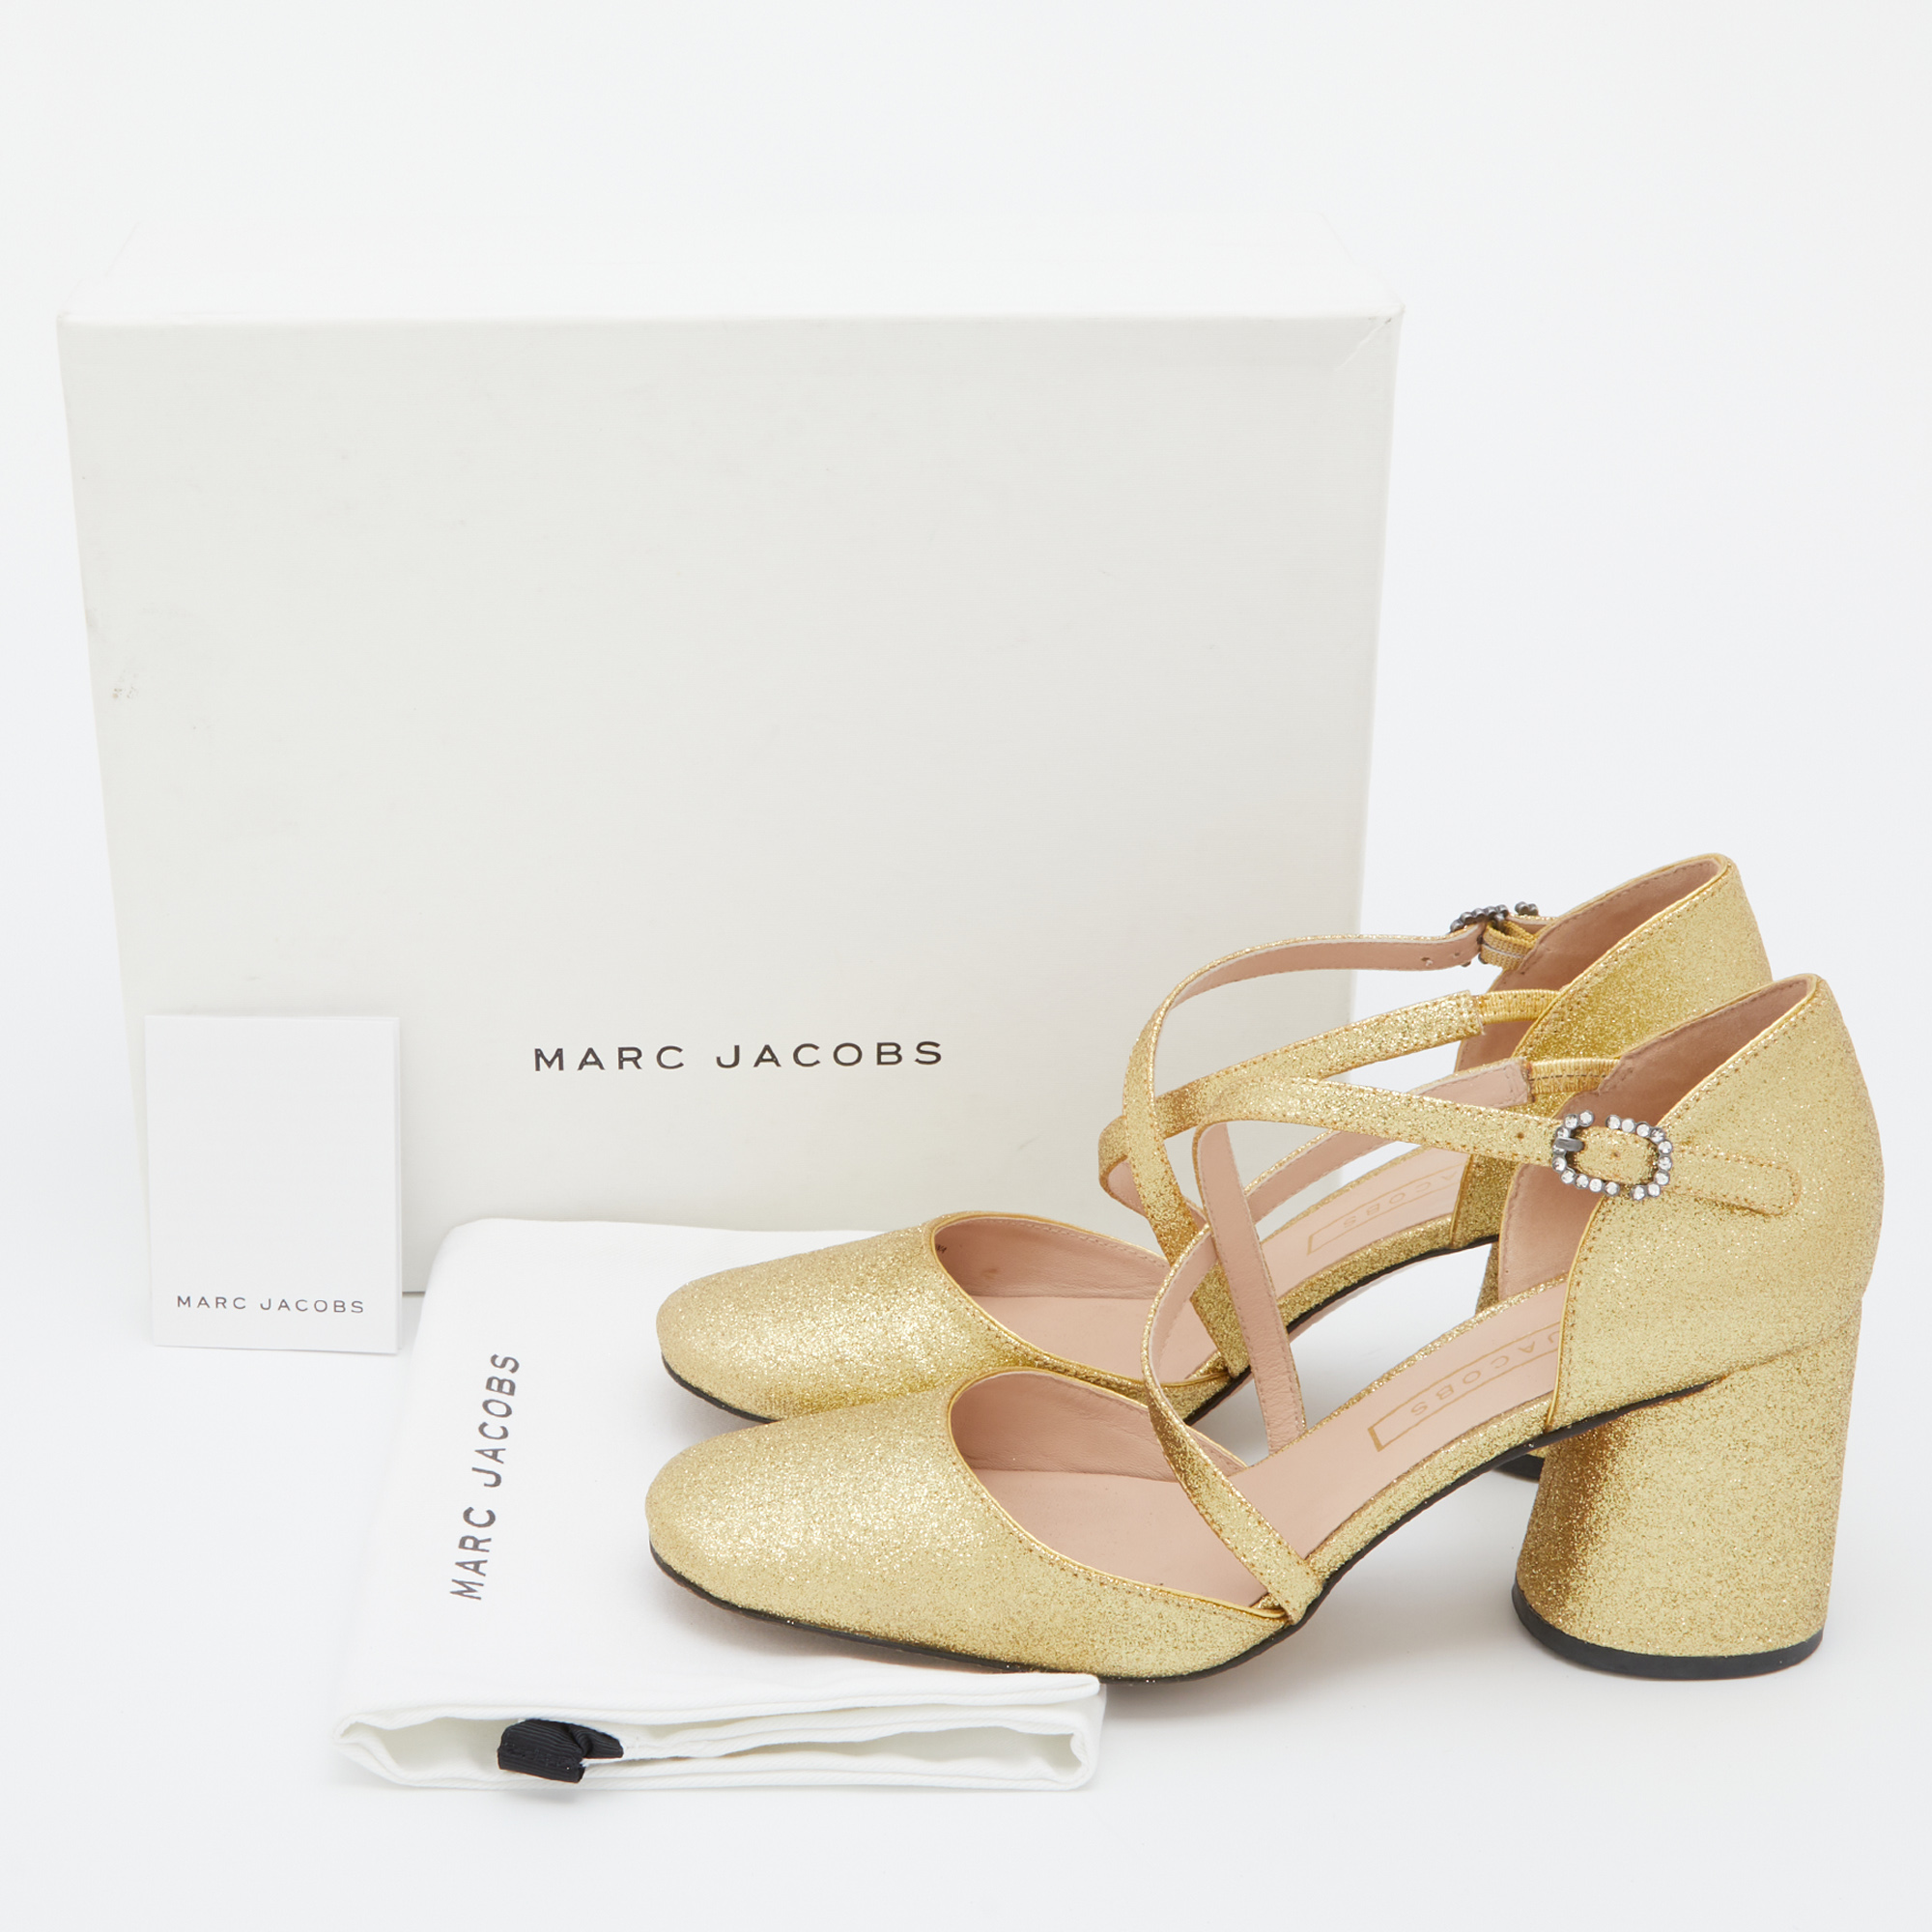 Marc Jacobs Gold Glitter Block Heel Ankle Strap Sandals Size 38